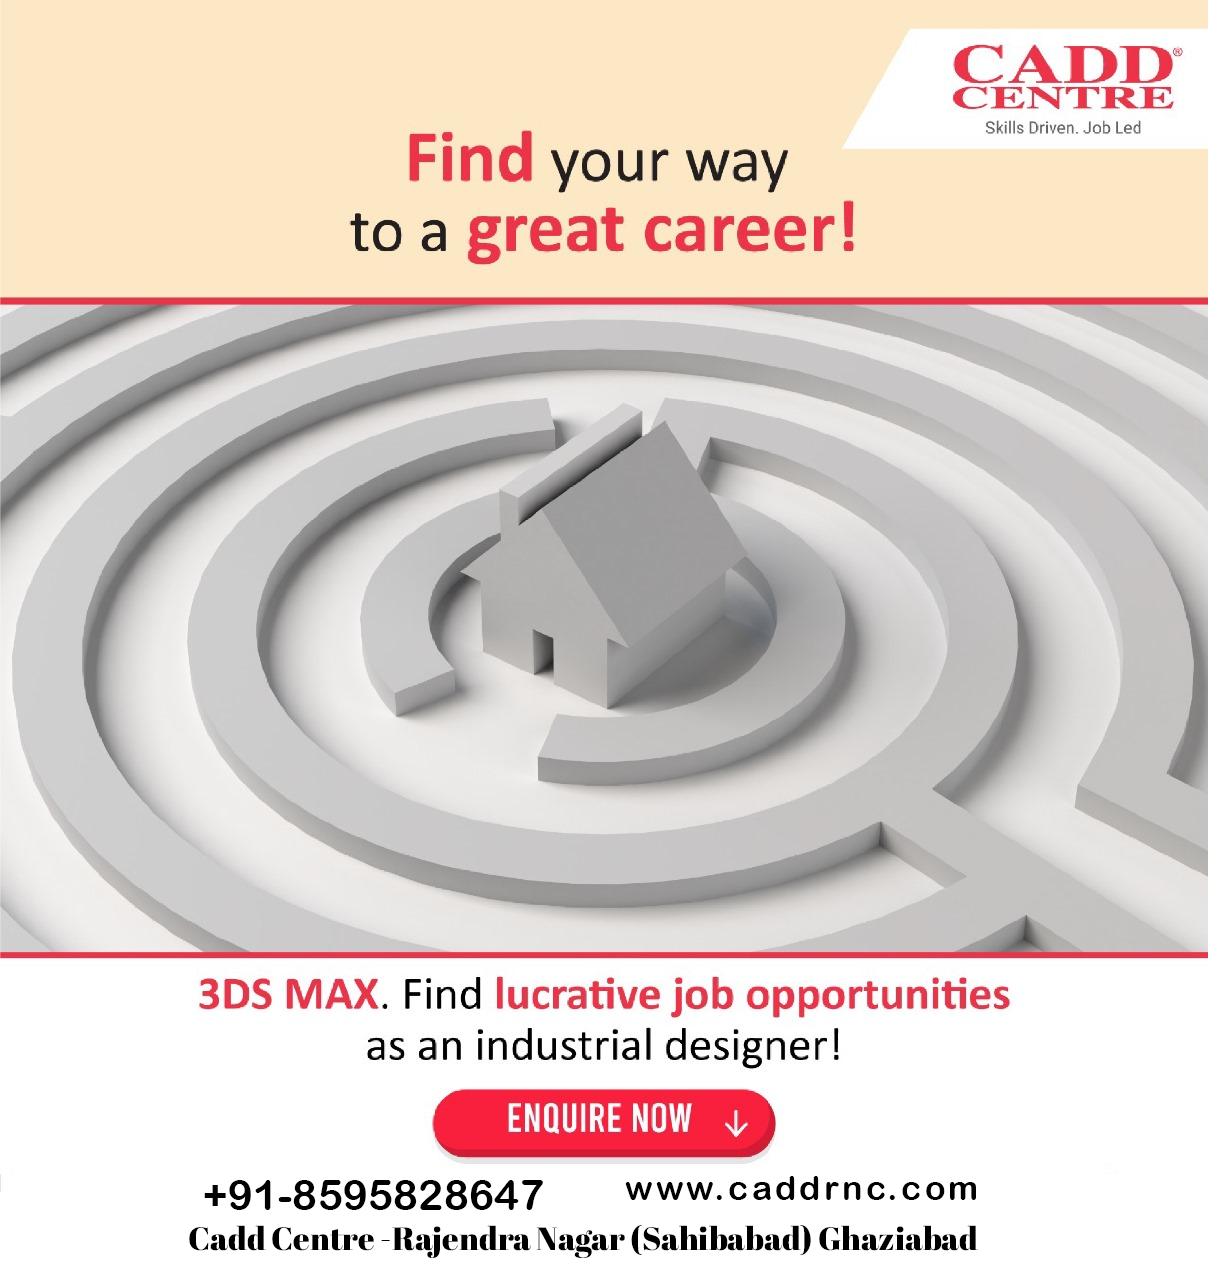 Find your way to a great career!